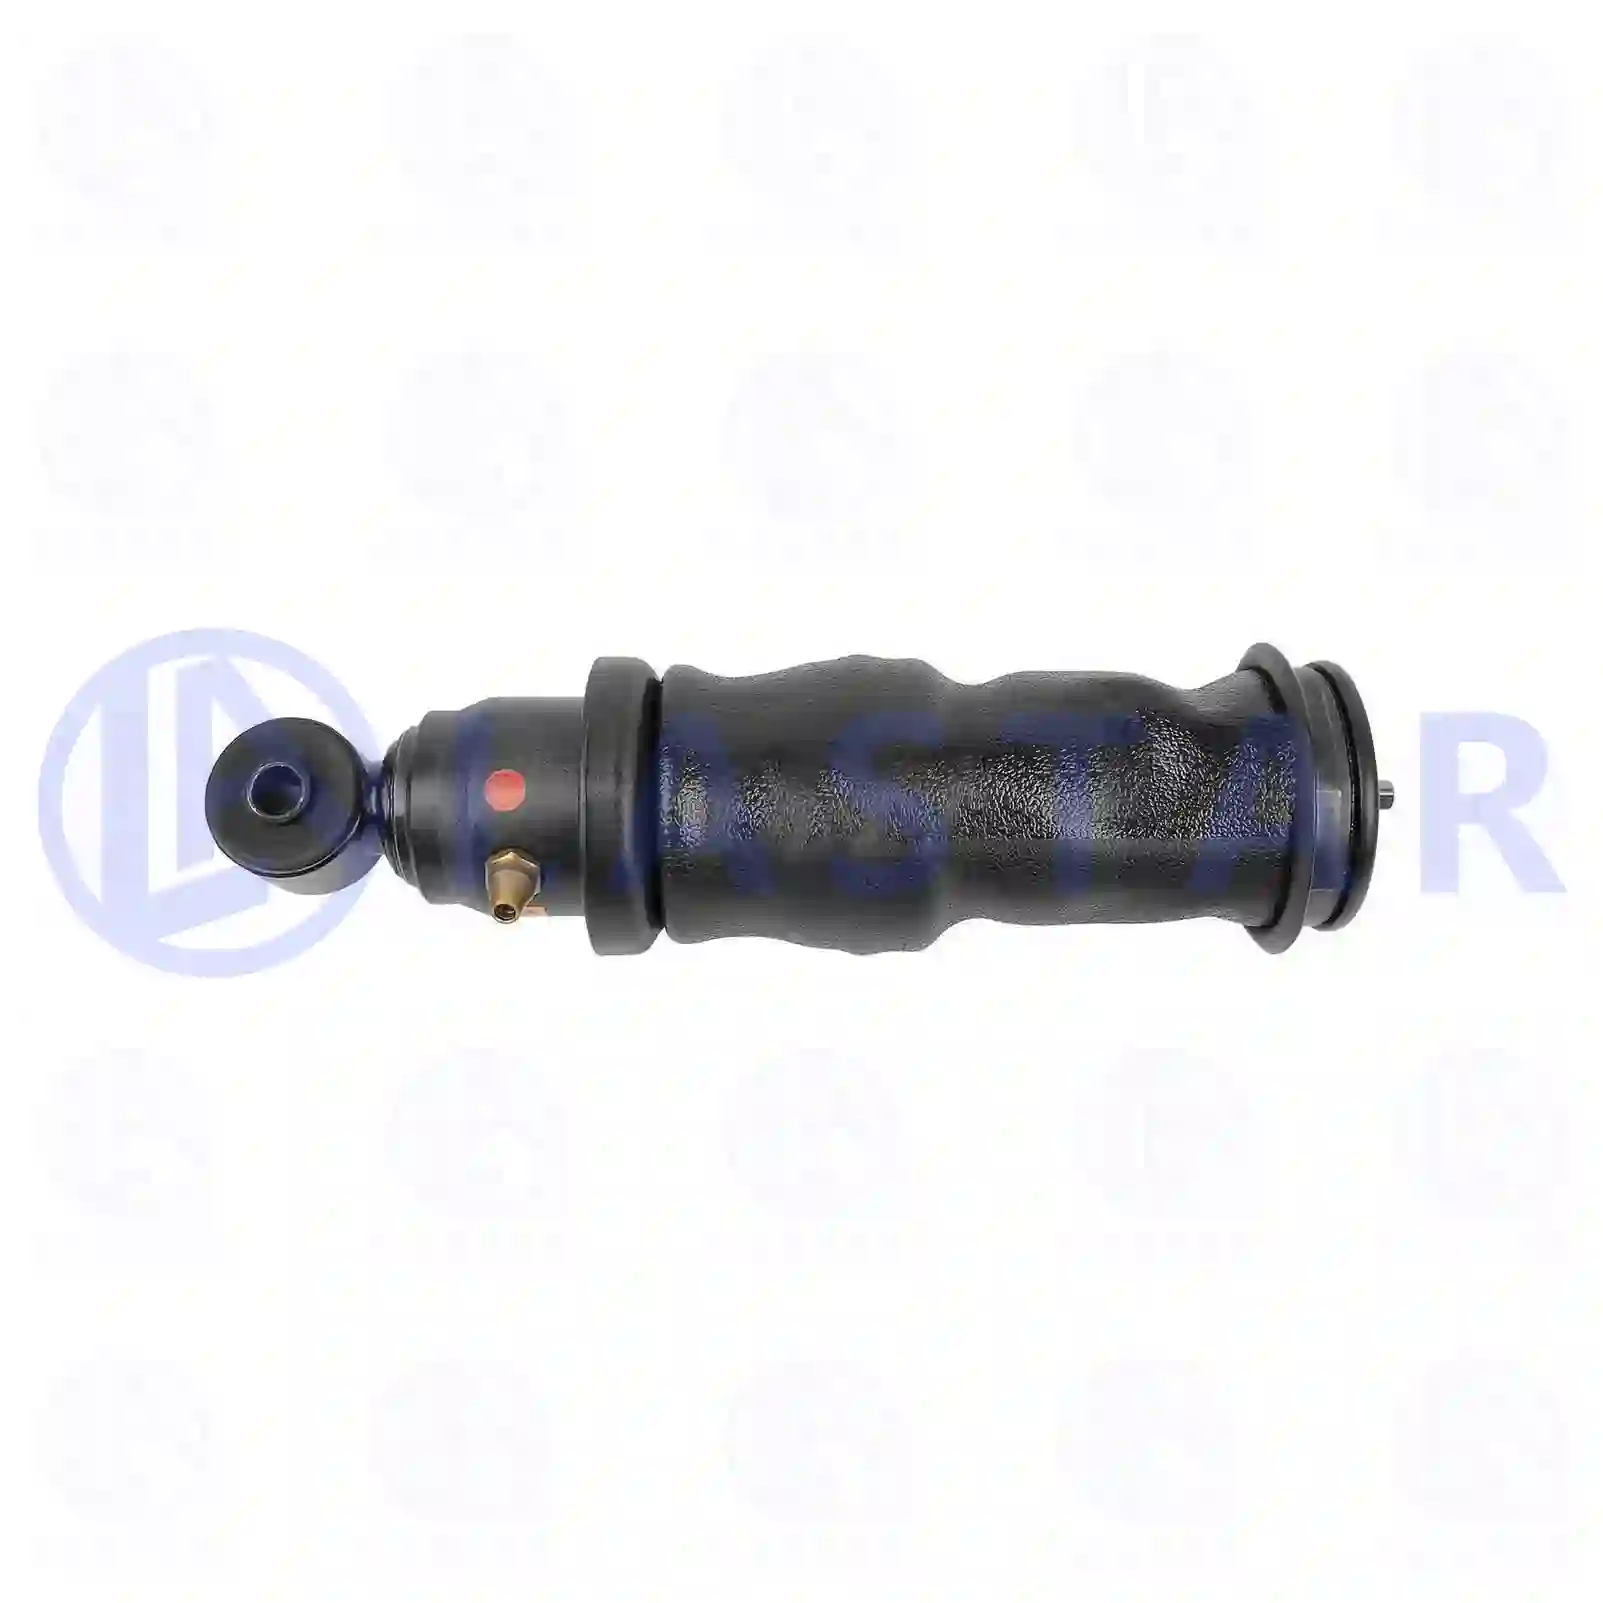 Cabin shock absorber, with air bellow, 77735945, 1117334, 1331634, 1348118, 1531200011, ZG41206-0008, ||  77735945 Lastar Spare Part | Truck Spare Parts, Auotomotive Spare Parts Cabin shock absorber, with air bellow, 77735945, 1117334, 1331634, 1348118, 1531200011, ZG41206-0008, ||  77735945 Lastar Spare Part | Truck Spare Parts, Auotomotive Spare Parts